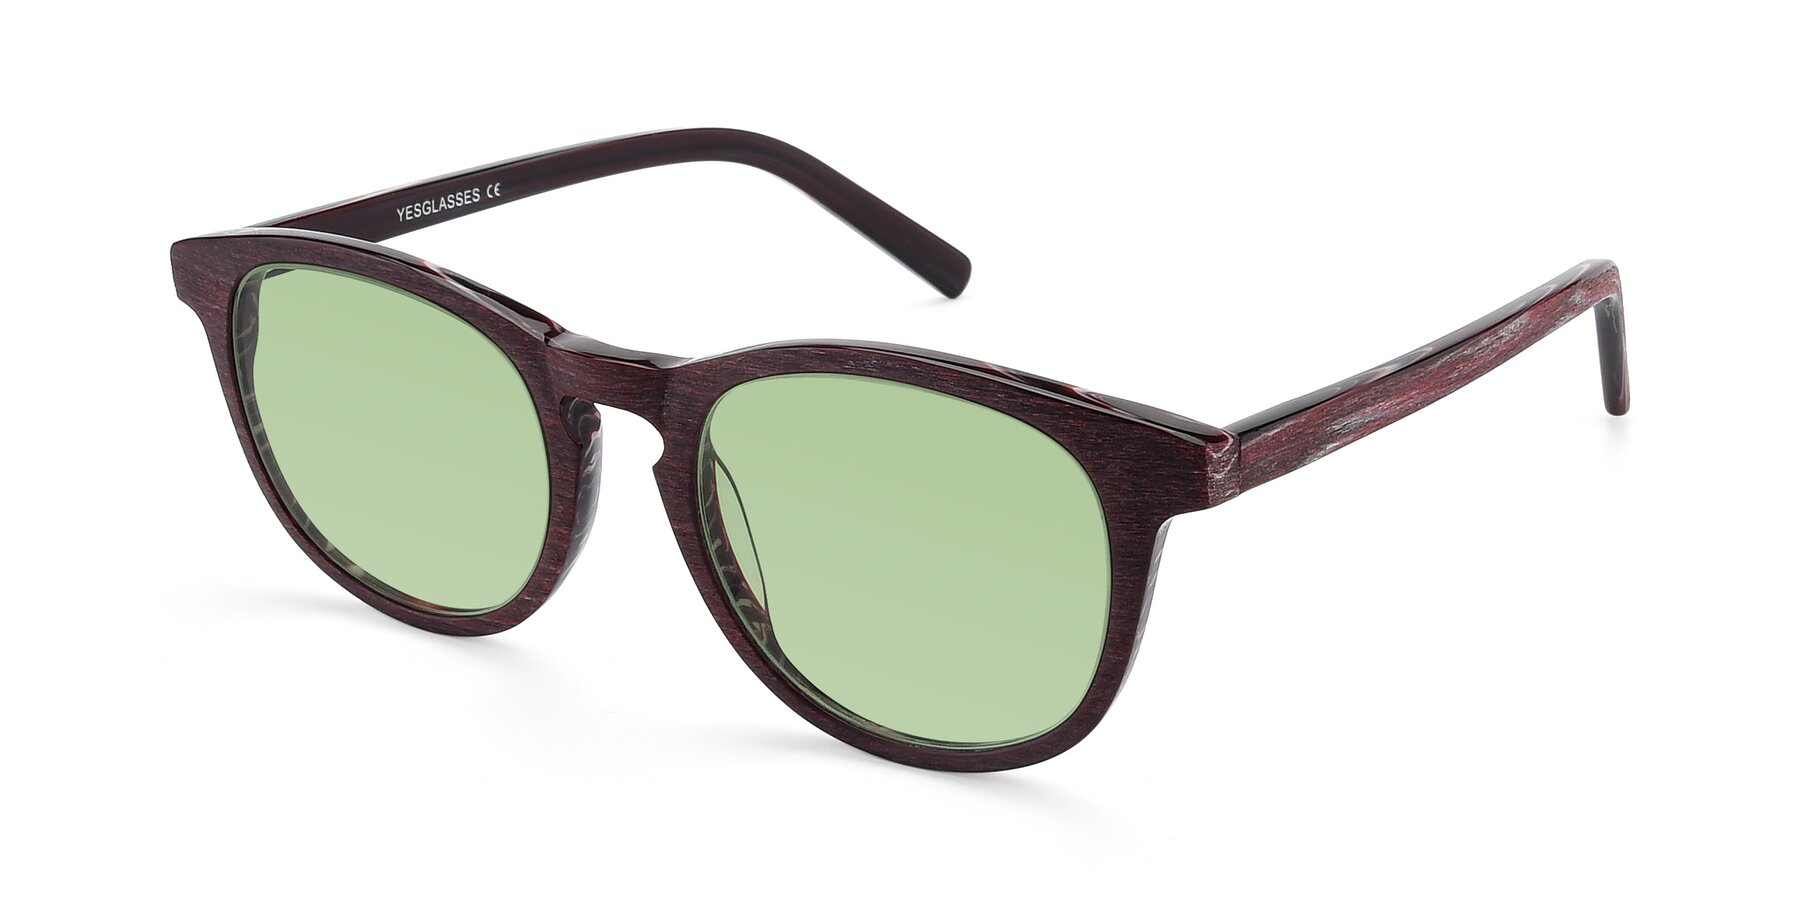 Angle of SR6044 in Wine-Wooden with Medium Green Tinted Lenses